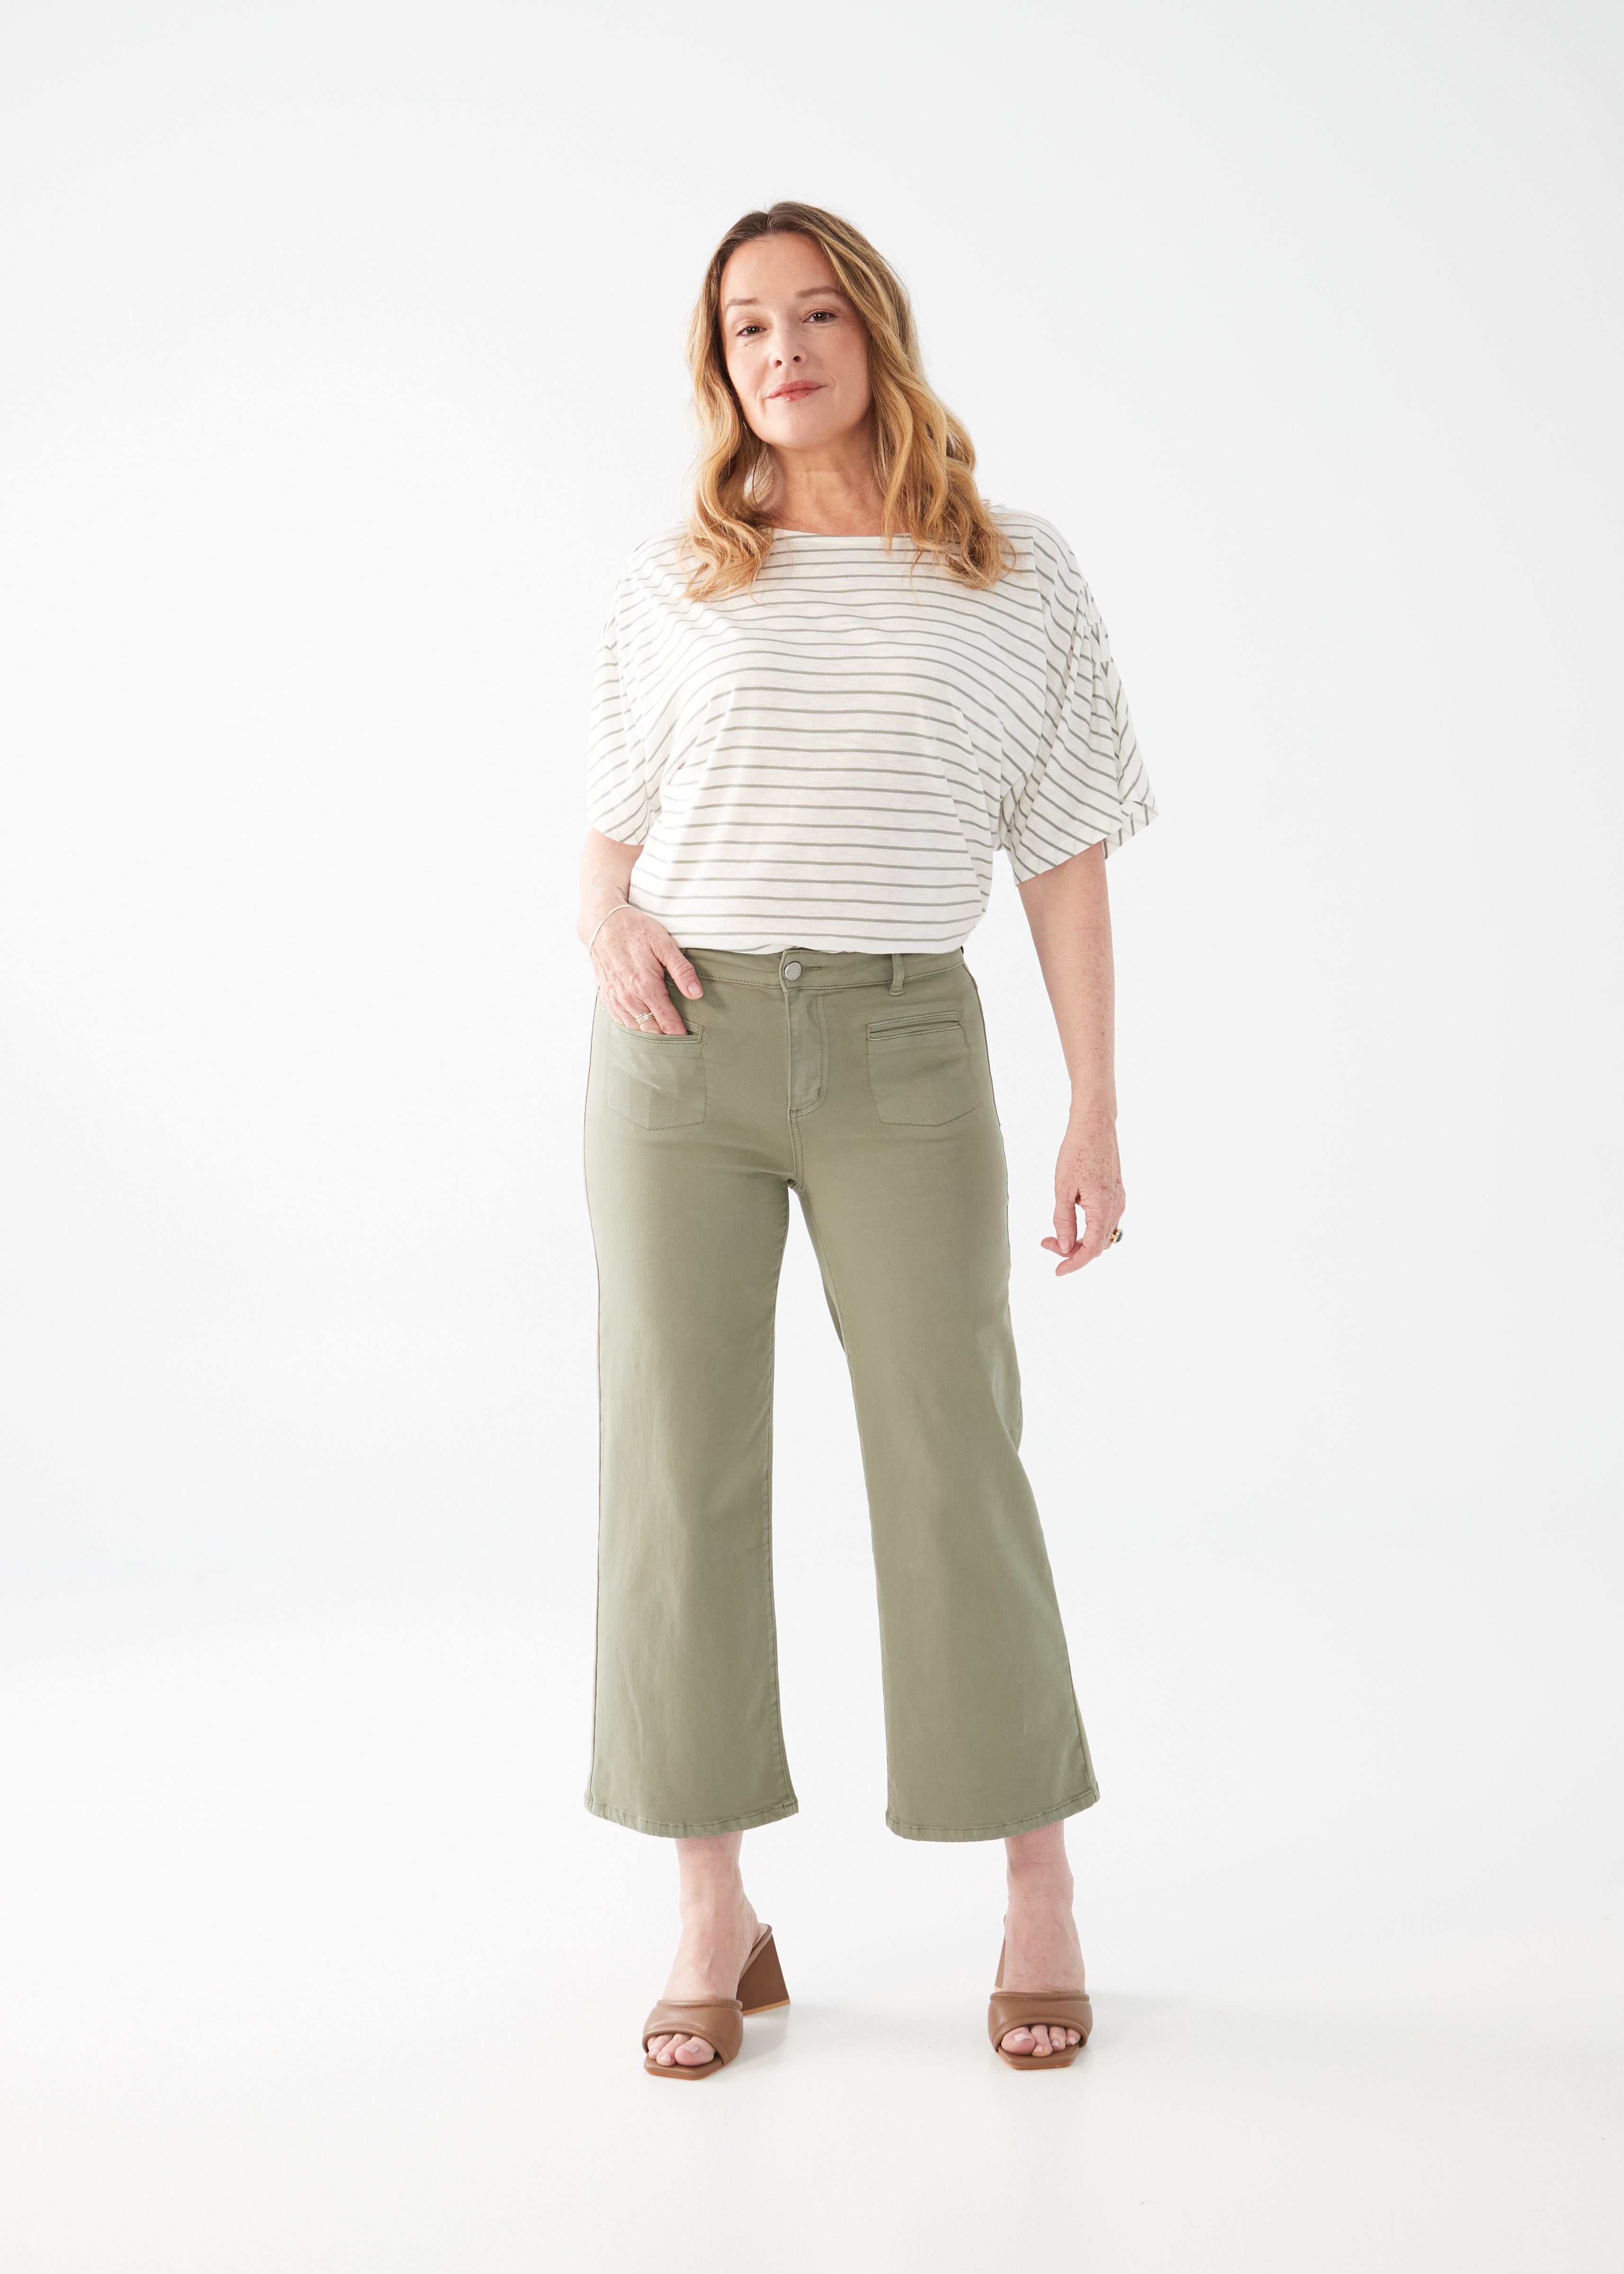 The FDJ Olivia Wide Crop jeans have a mid-rise and come in a beautiful fern green colour. These stylish jeans offer a comfortable fit with a flattering silhouette.